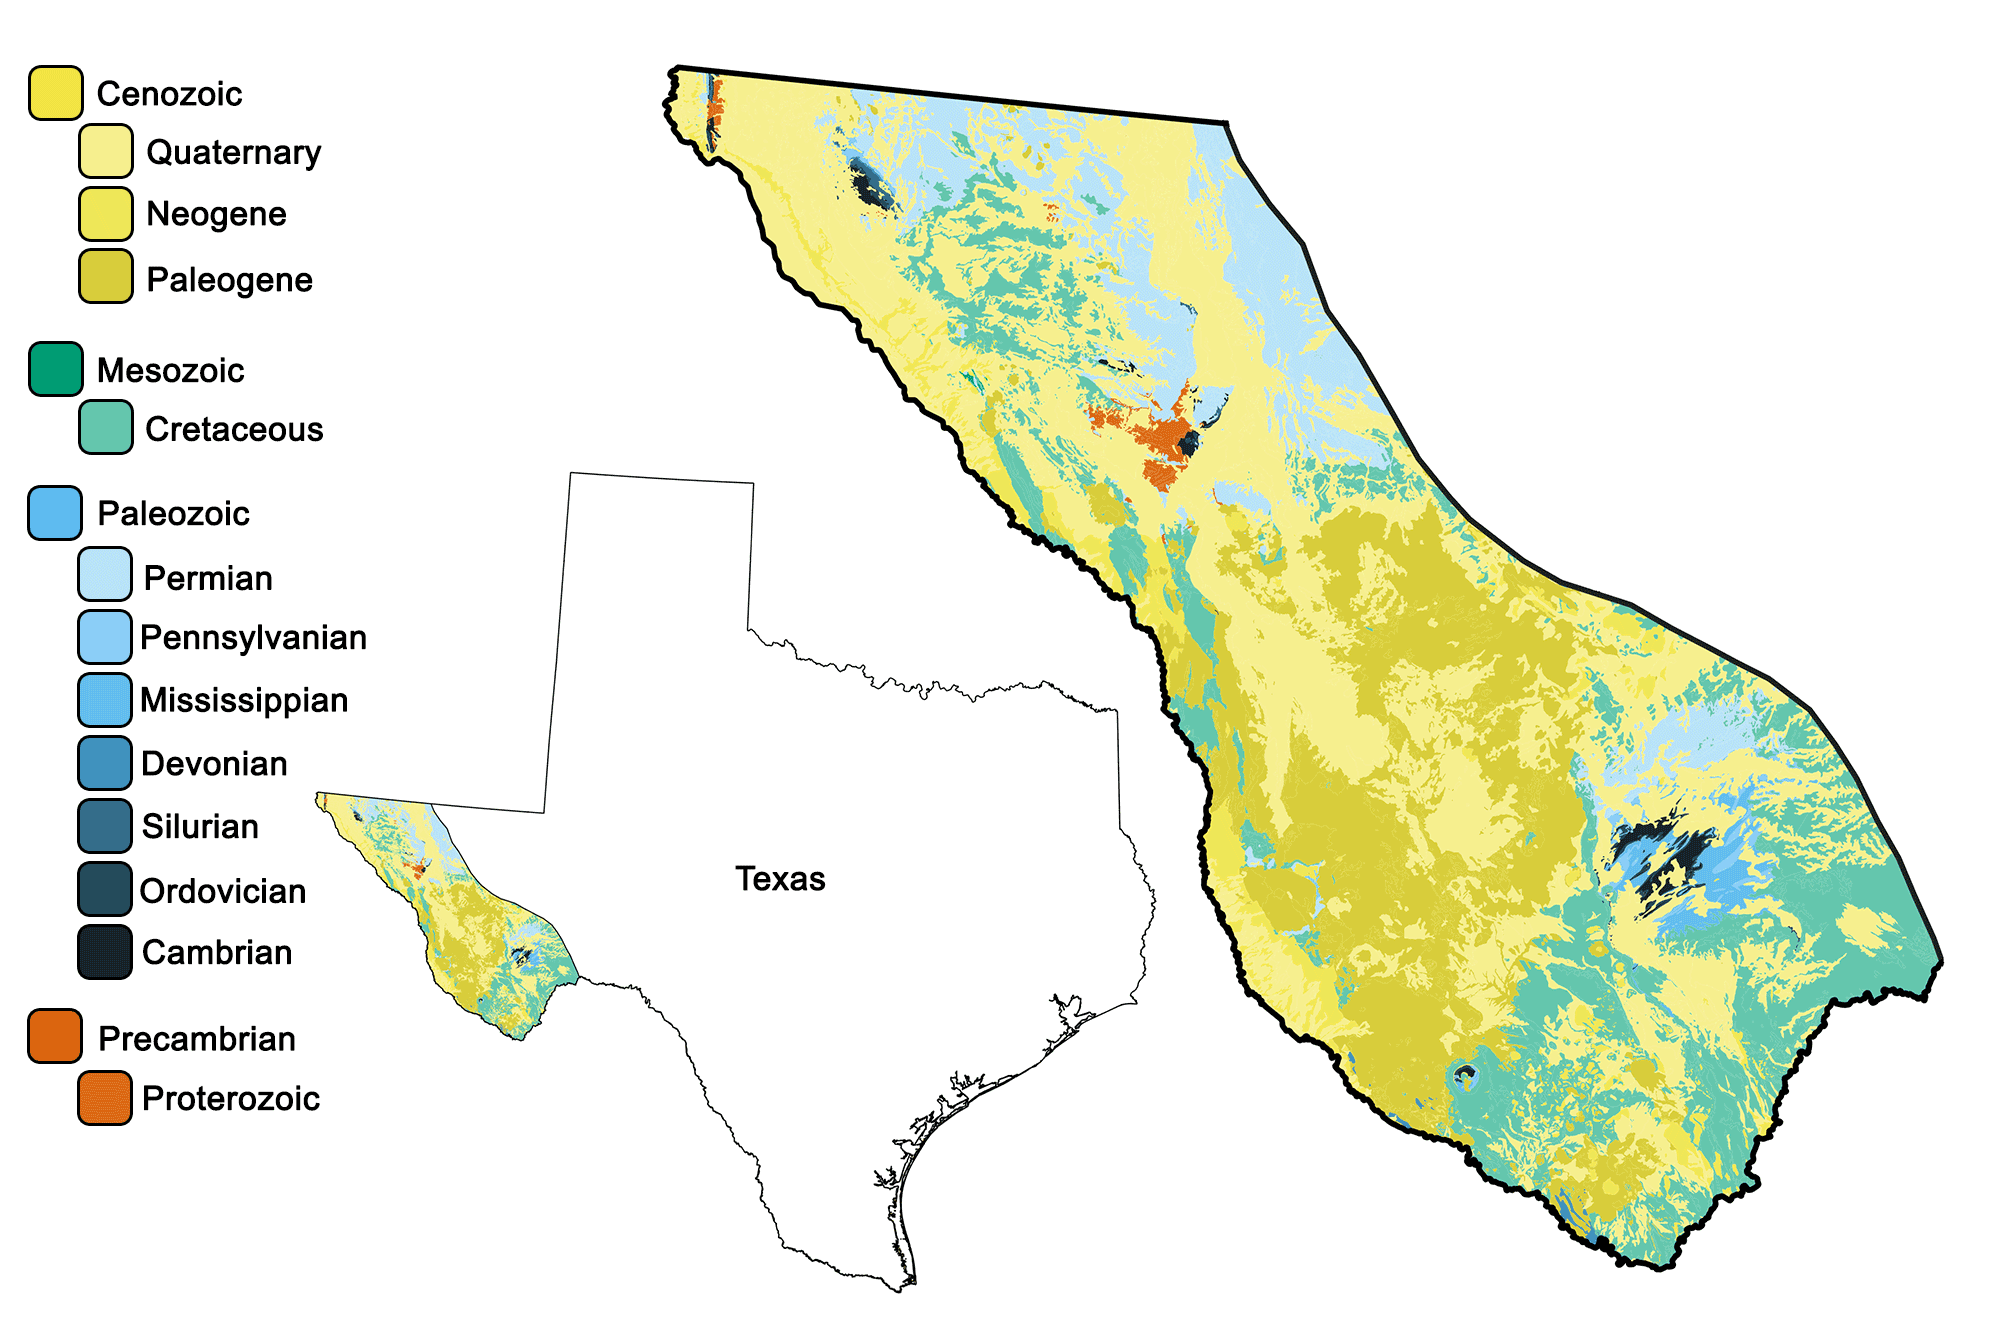 Geologic map of the Basin and Range region of the South-Central United States.